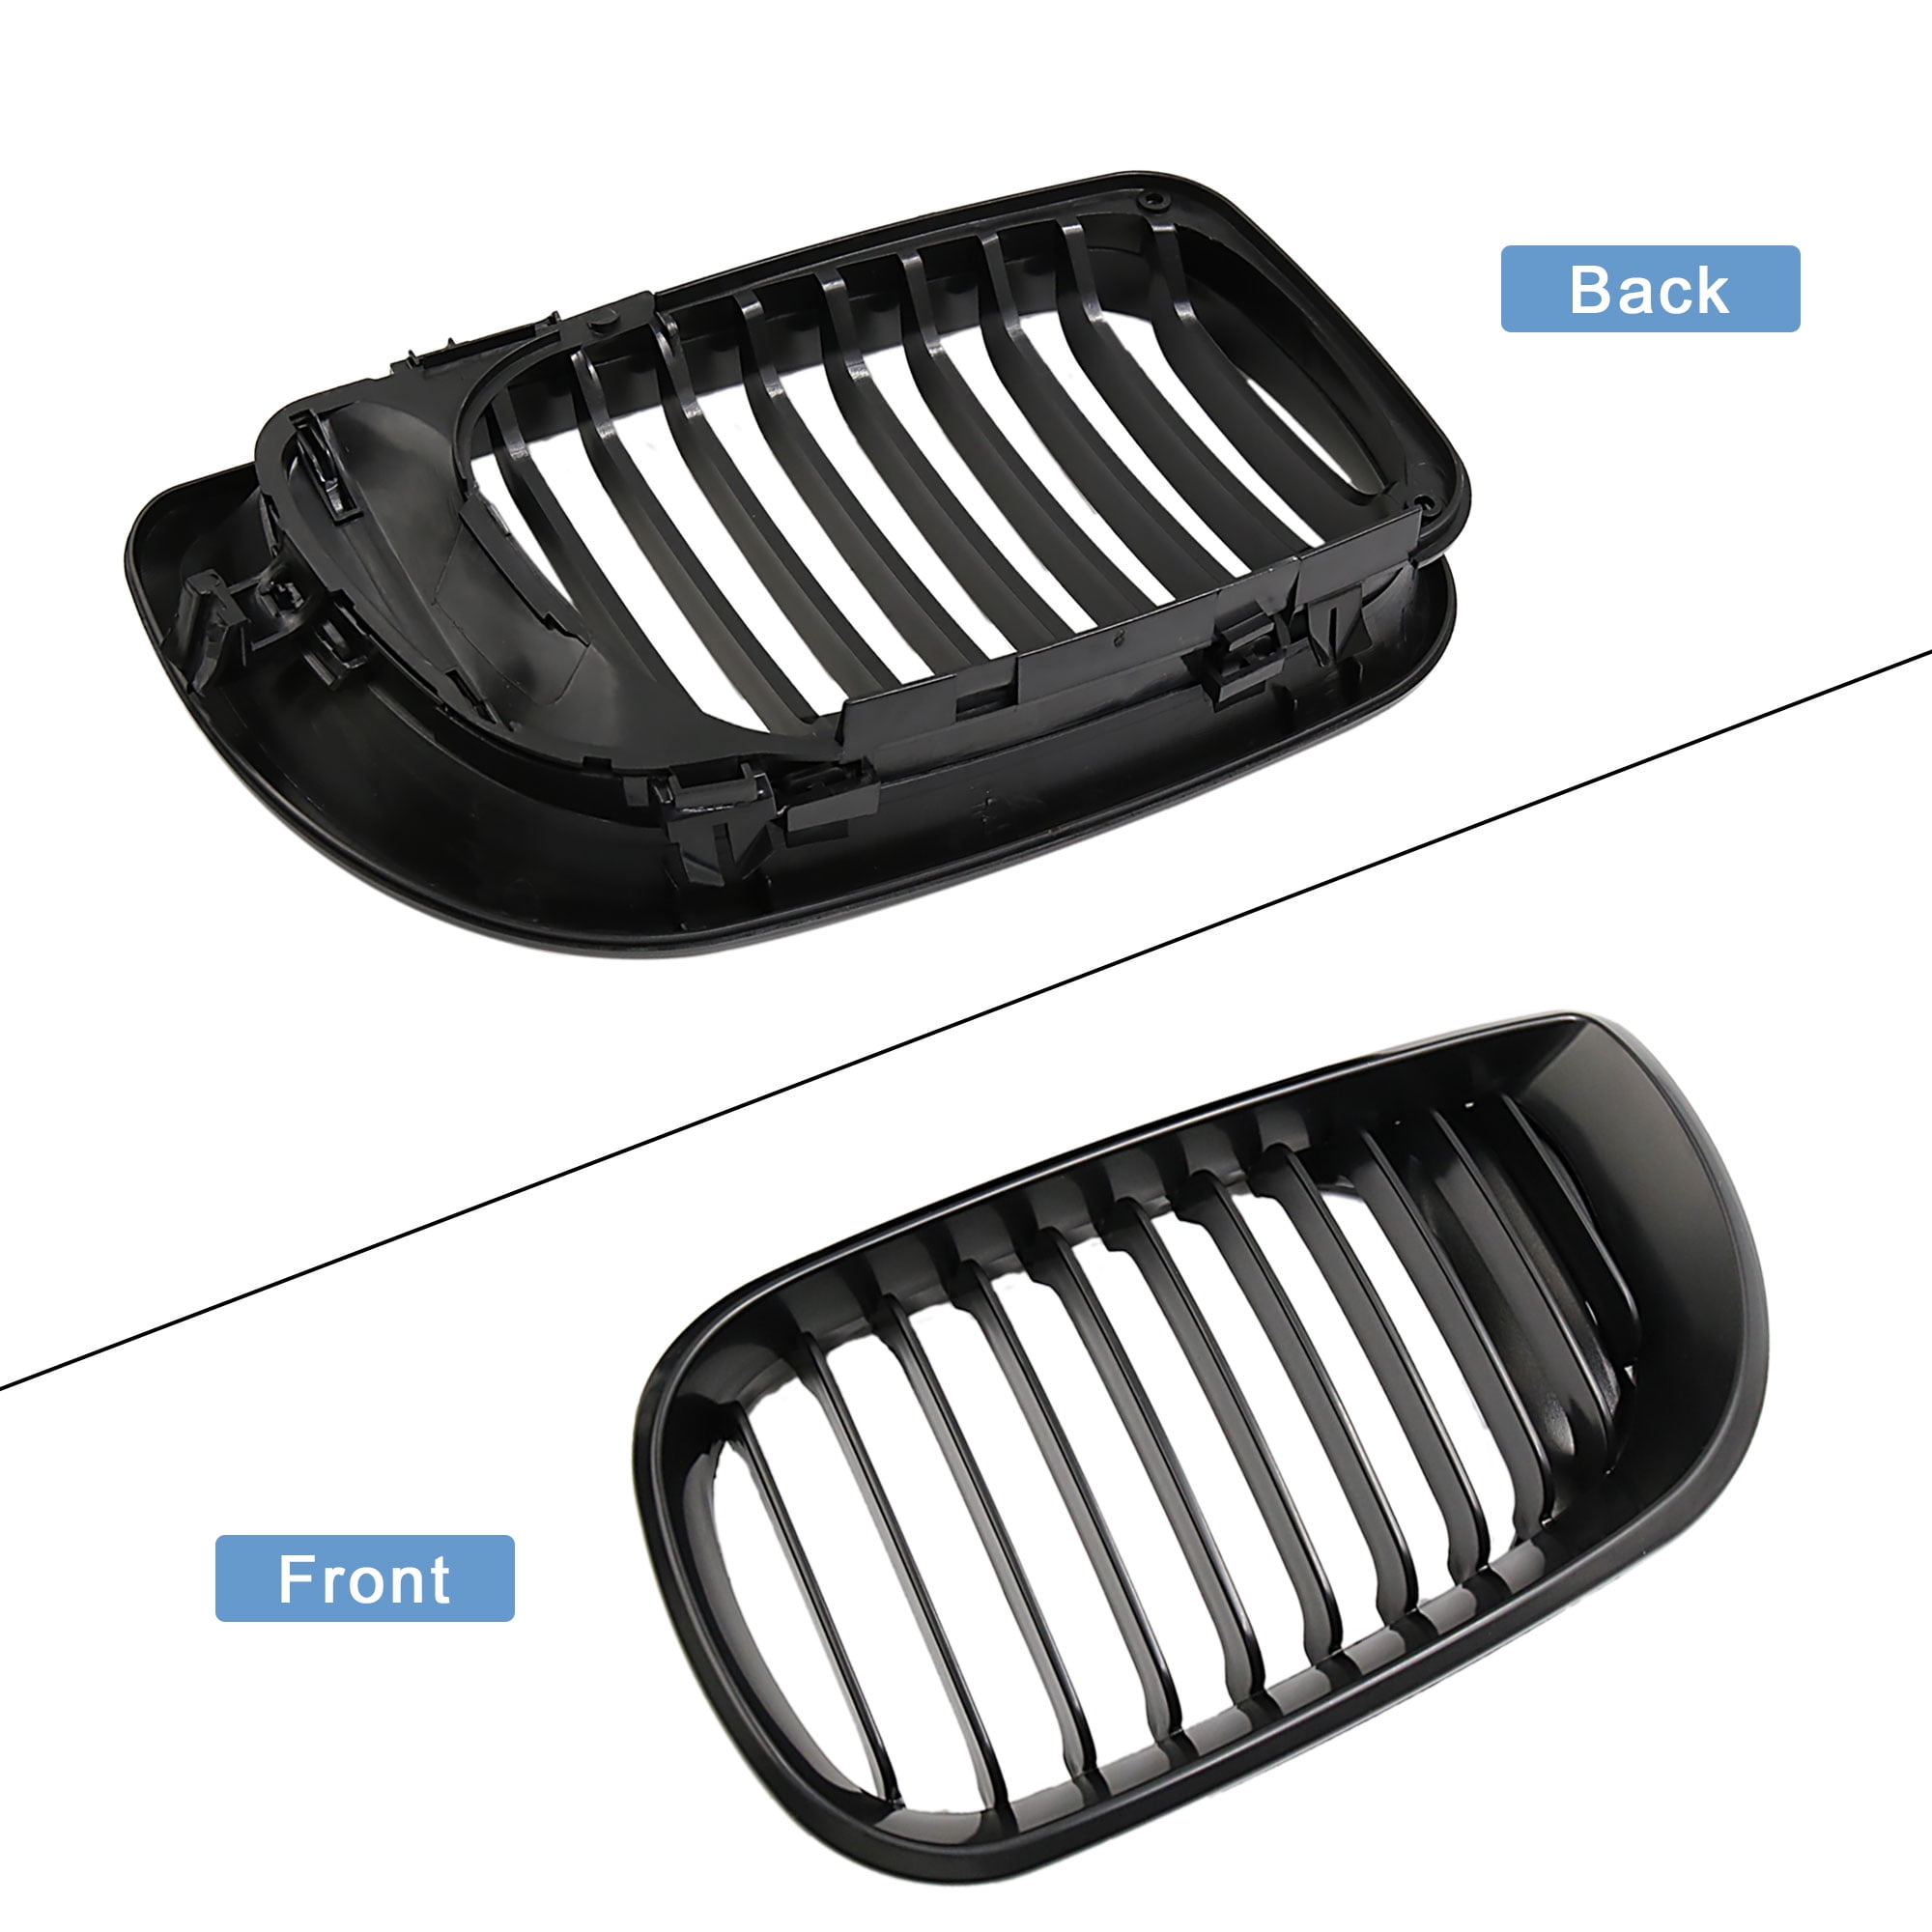  B-M-W E46 Grill Front Kidney Grille for 2002-2005 3 Series  4-Door 320 325 325i 330 Sedan Wagon 4D Car (Gloss Black) : Automotive